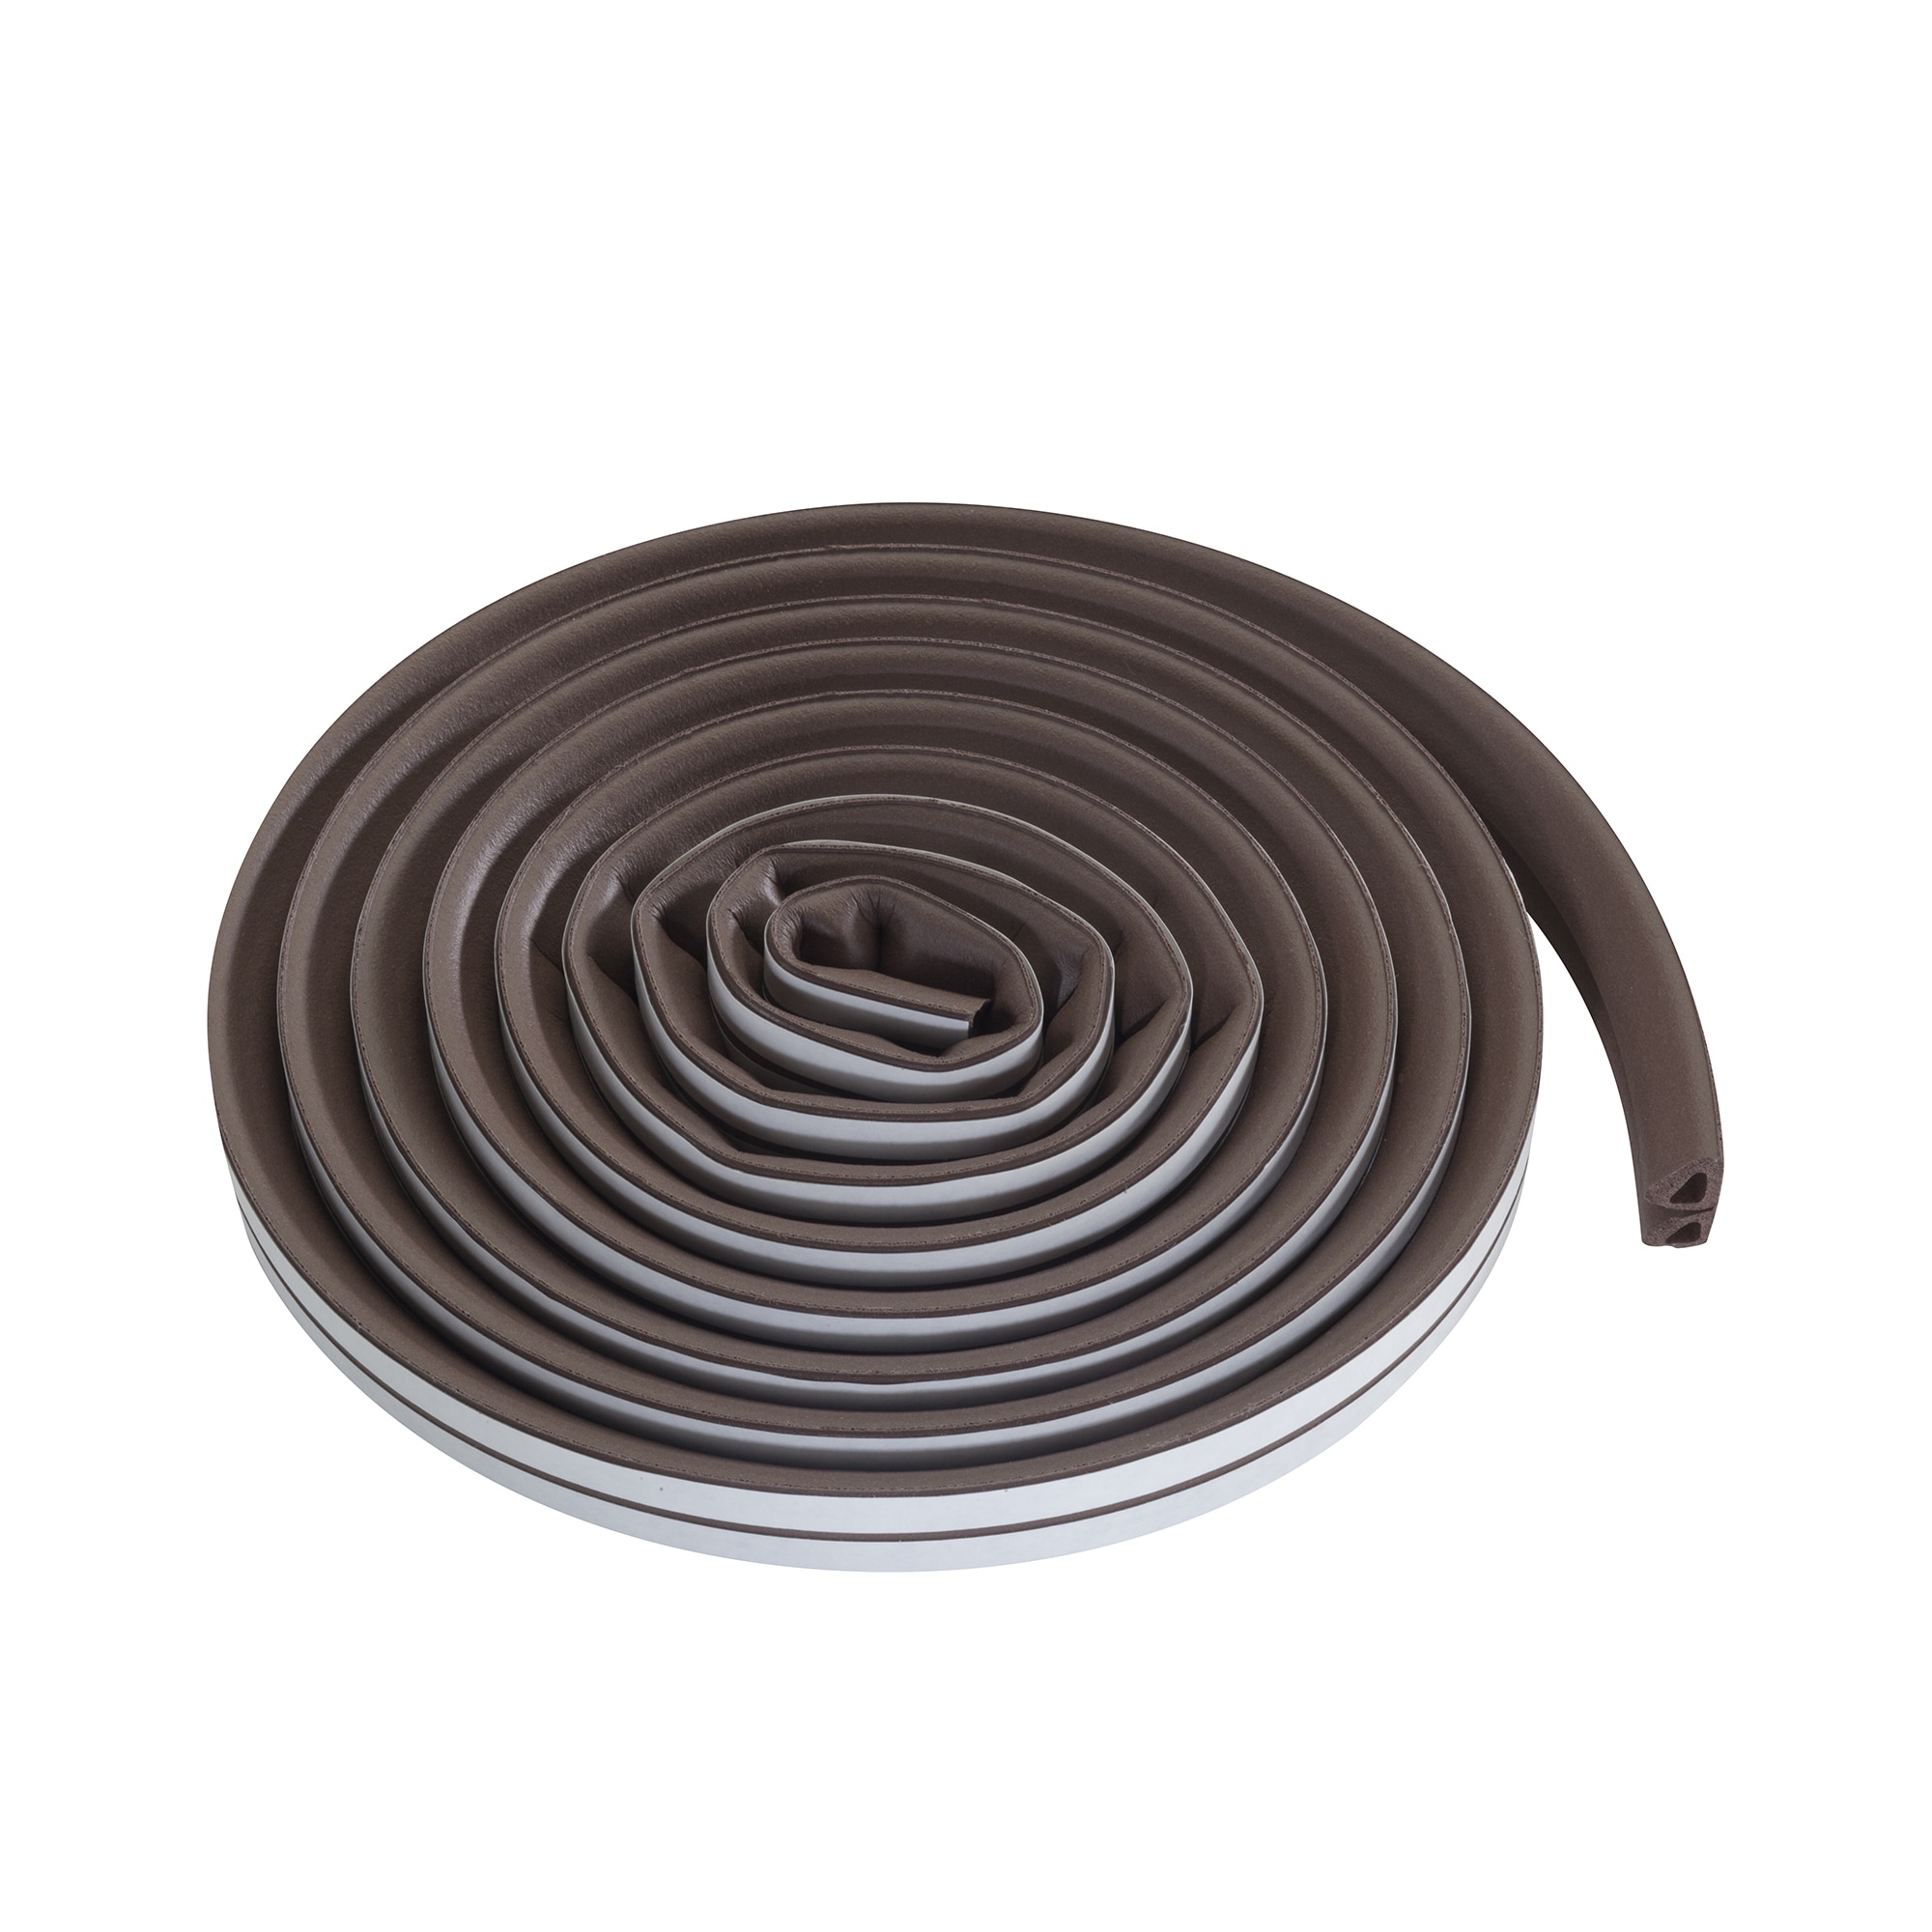 M-D 17-ft x 3/8-in Brown Silicone Window Weatherstrip in the  Weatherstripping department at